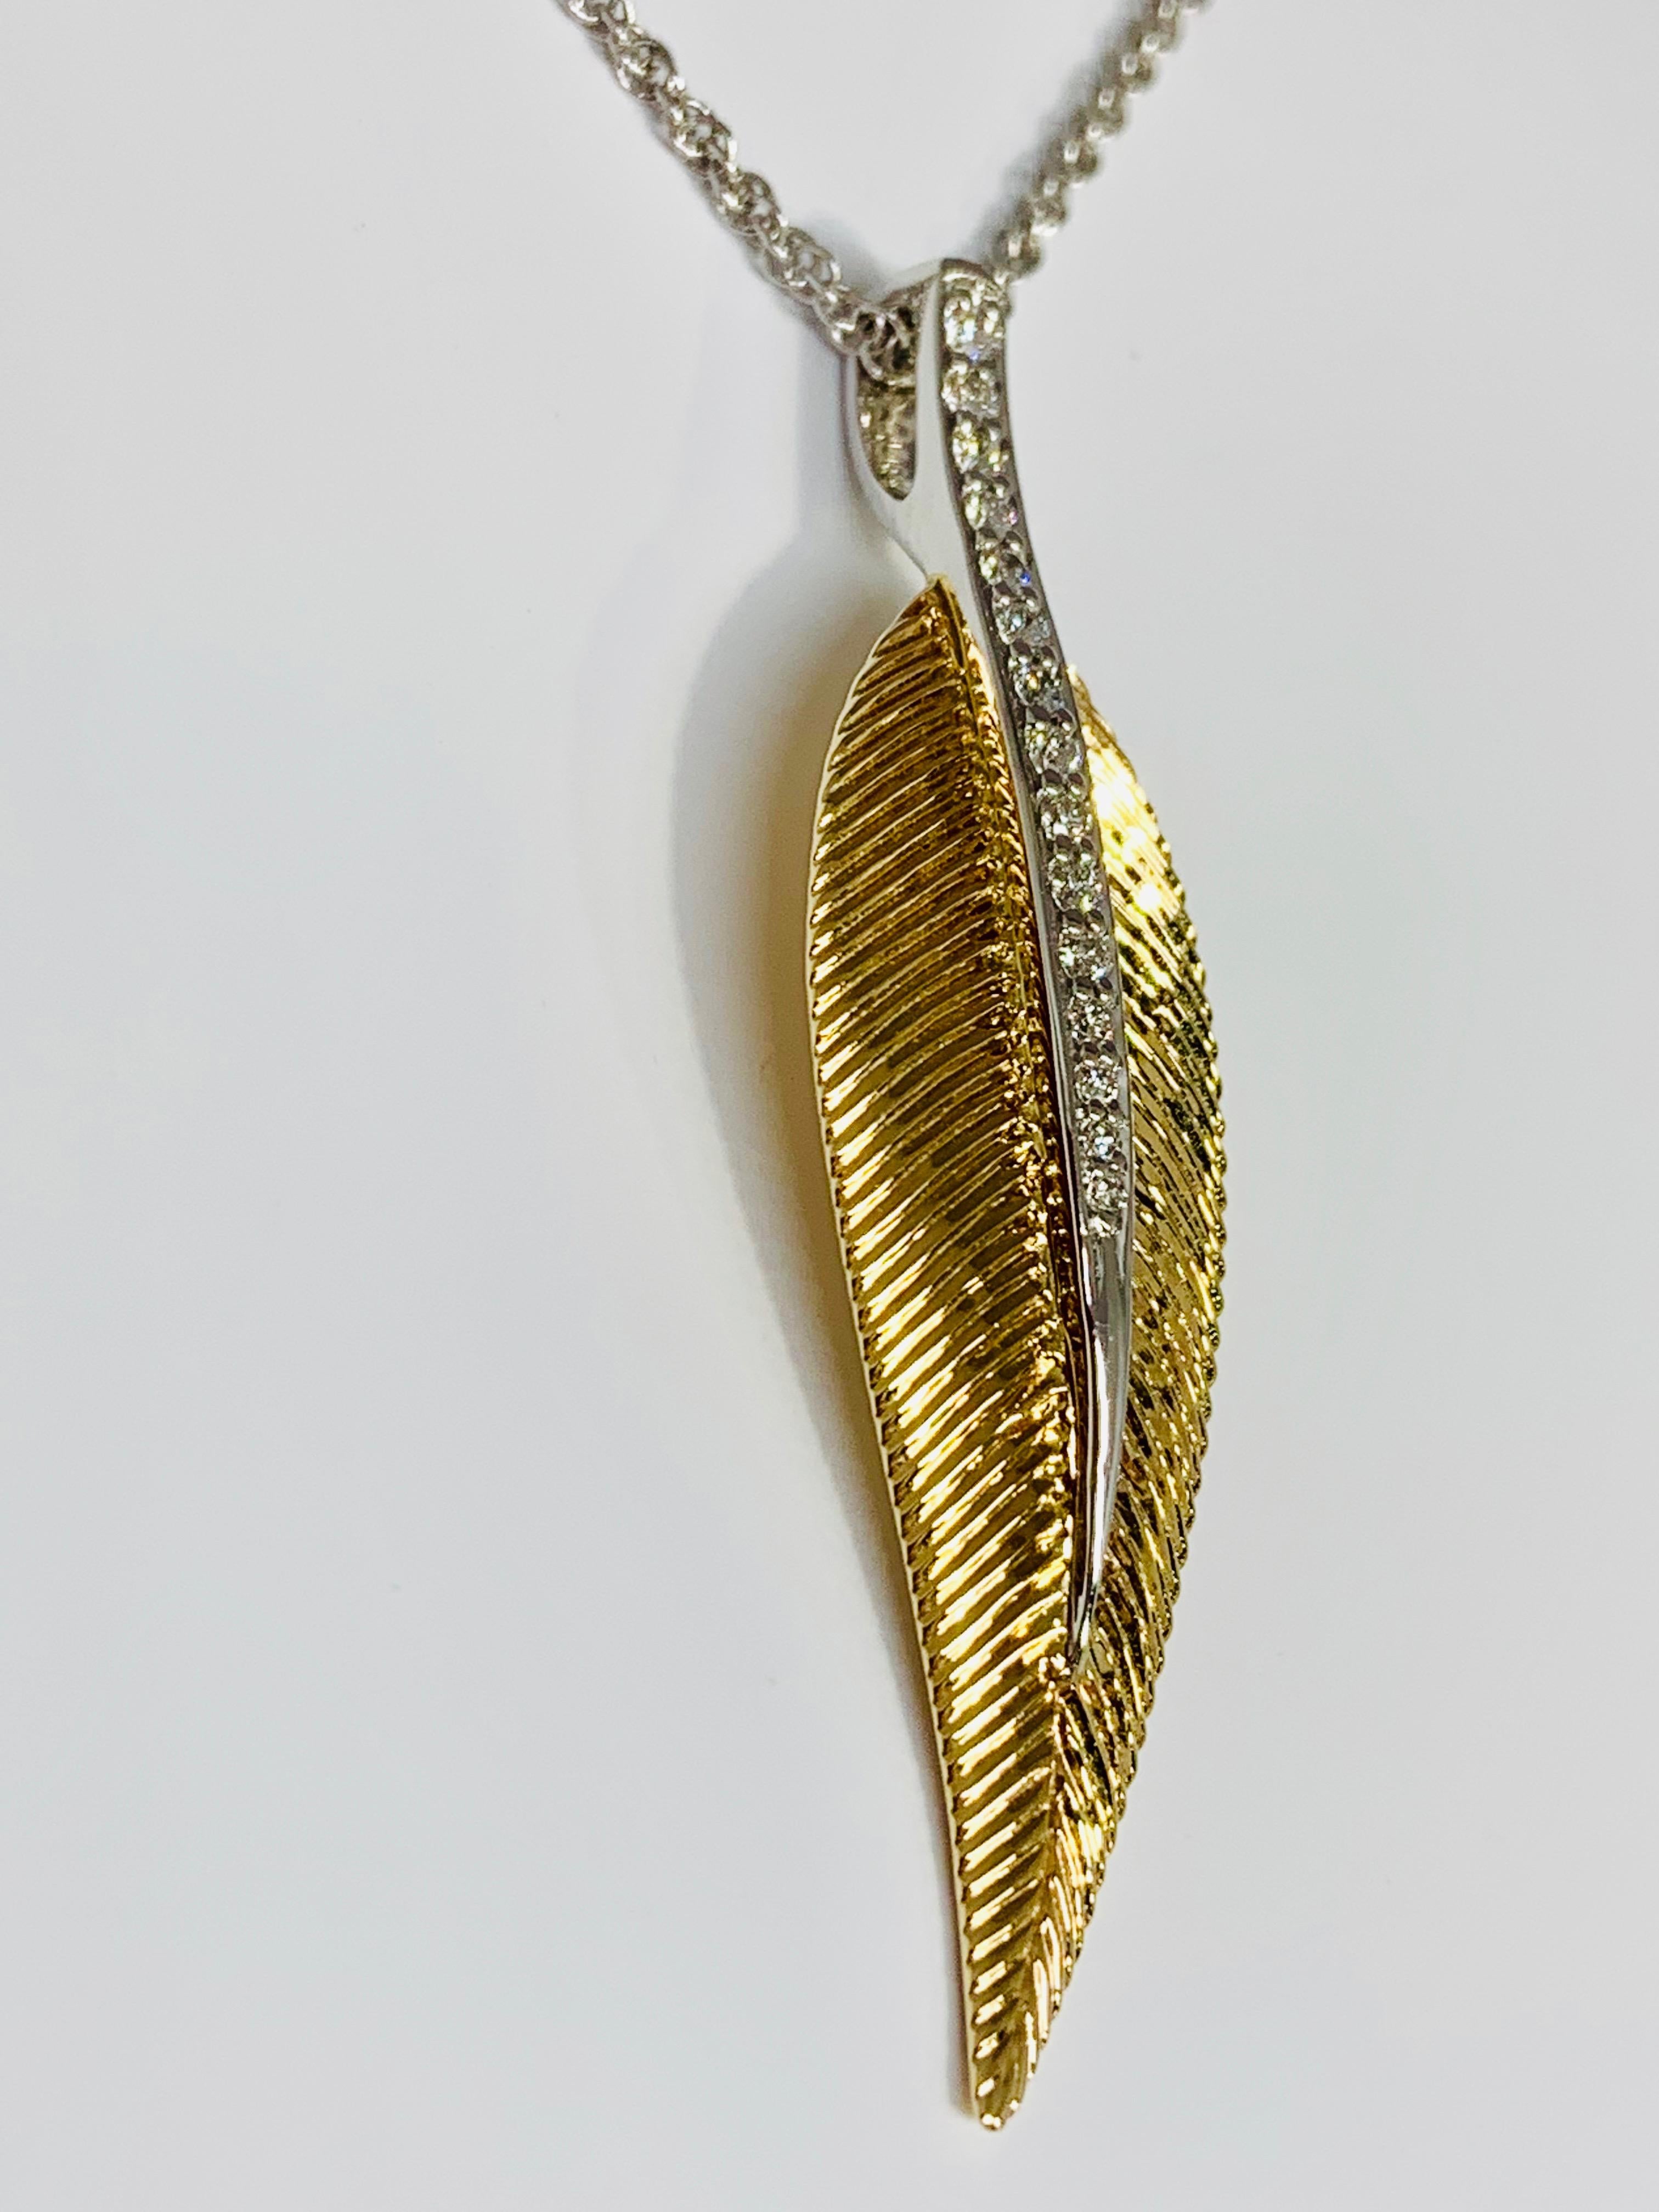 This beautiful textured leaf pendant from Allison-Kaufman Company features 0.15 carats of round diamonds. The two tone pendant includes an 18K white gold 18